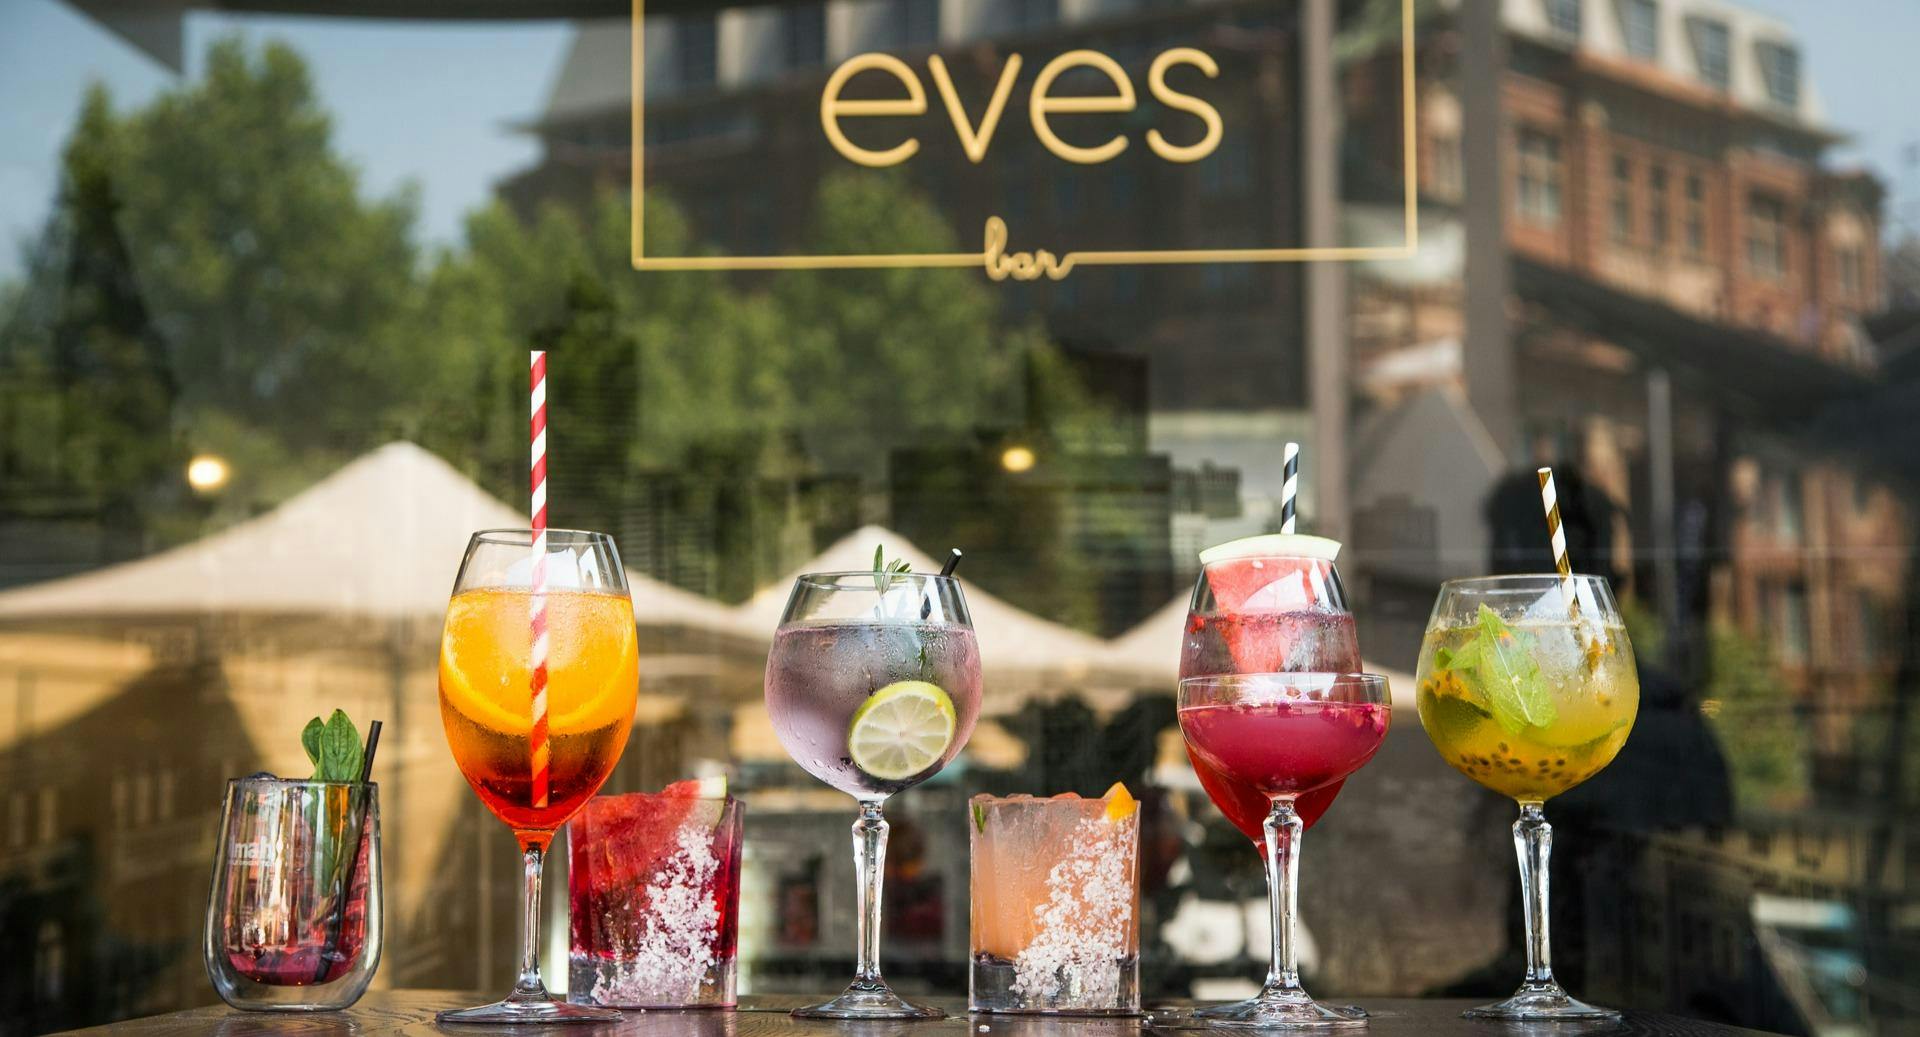 Photo of restaurant Eve's Bar in Chippendale, Sydney